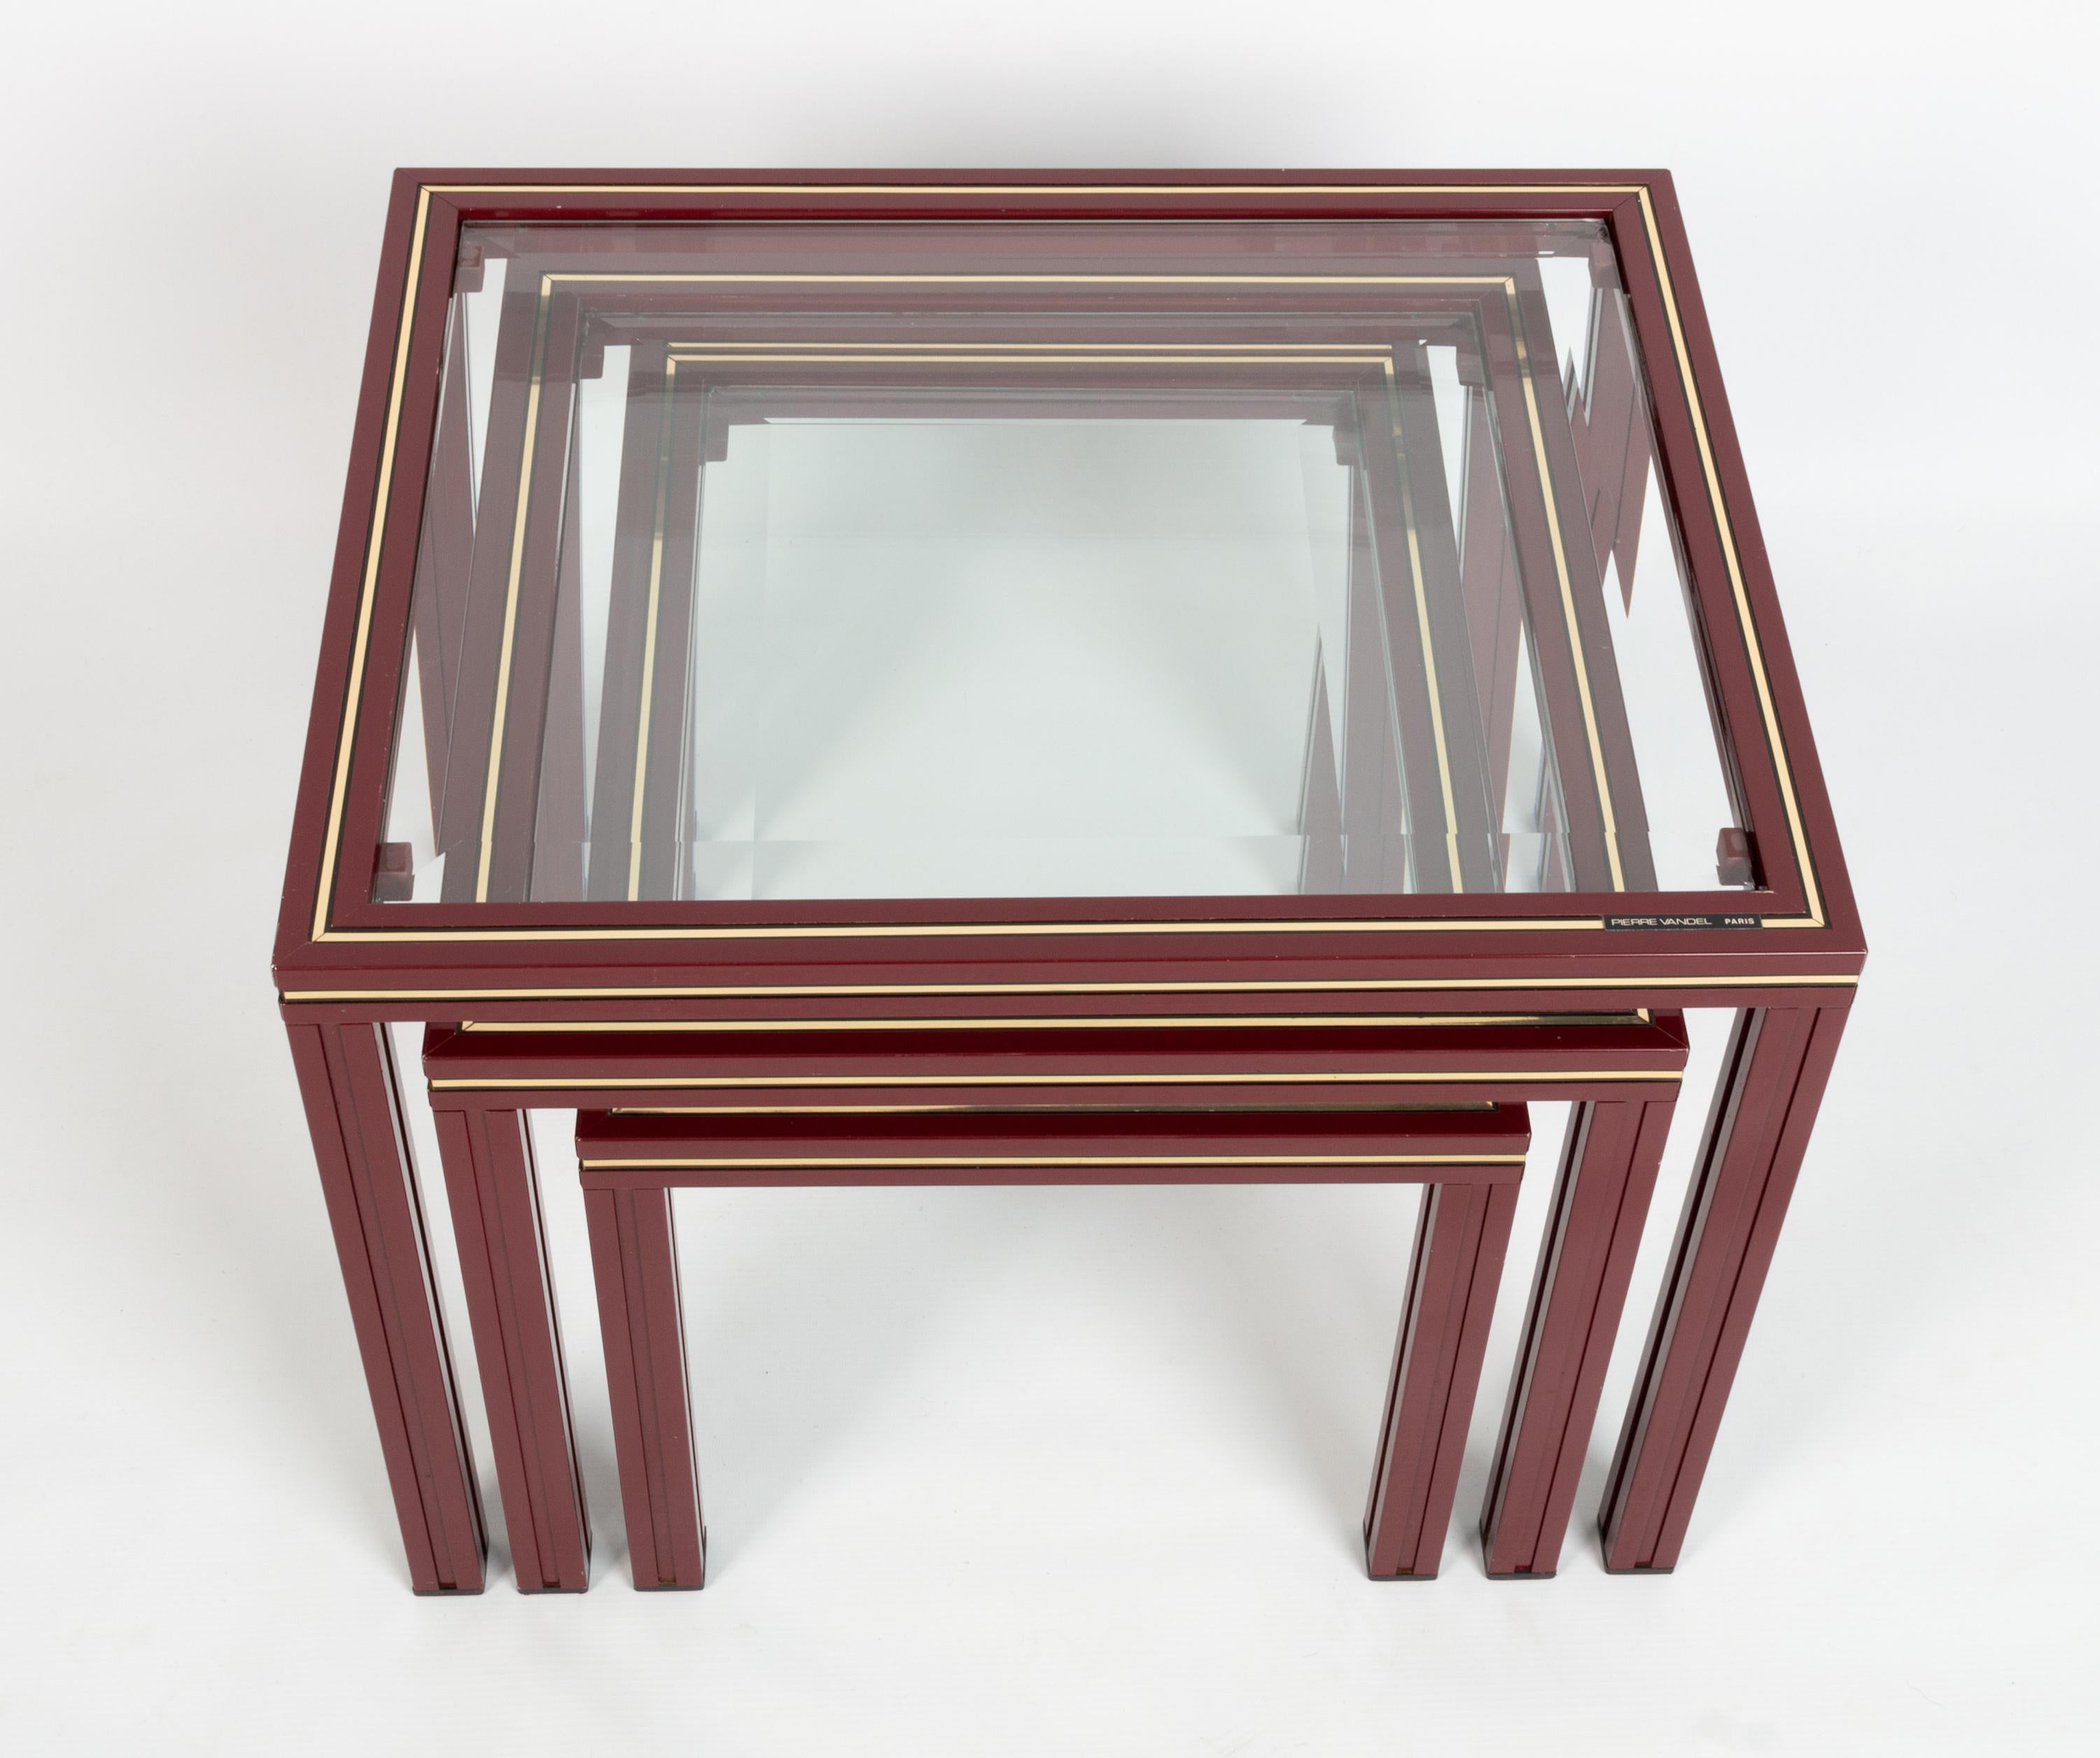 Pierre Vandel set of three nesting tables, France, circa 1970. 

Very good vintage condition, with signs of wear commensurate of age. 

Slight nibbles to glass:
Large table - 2 corners chipped, light scratched to glass
Middle table 1 corner